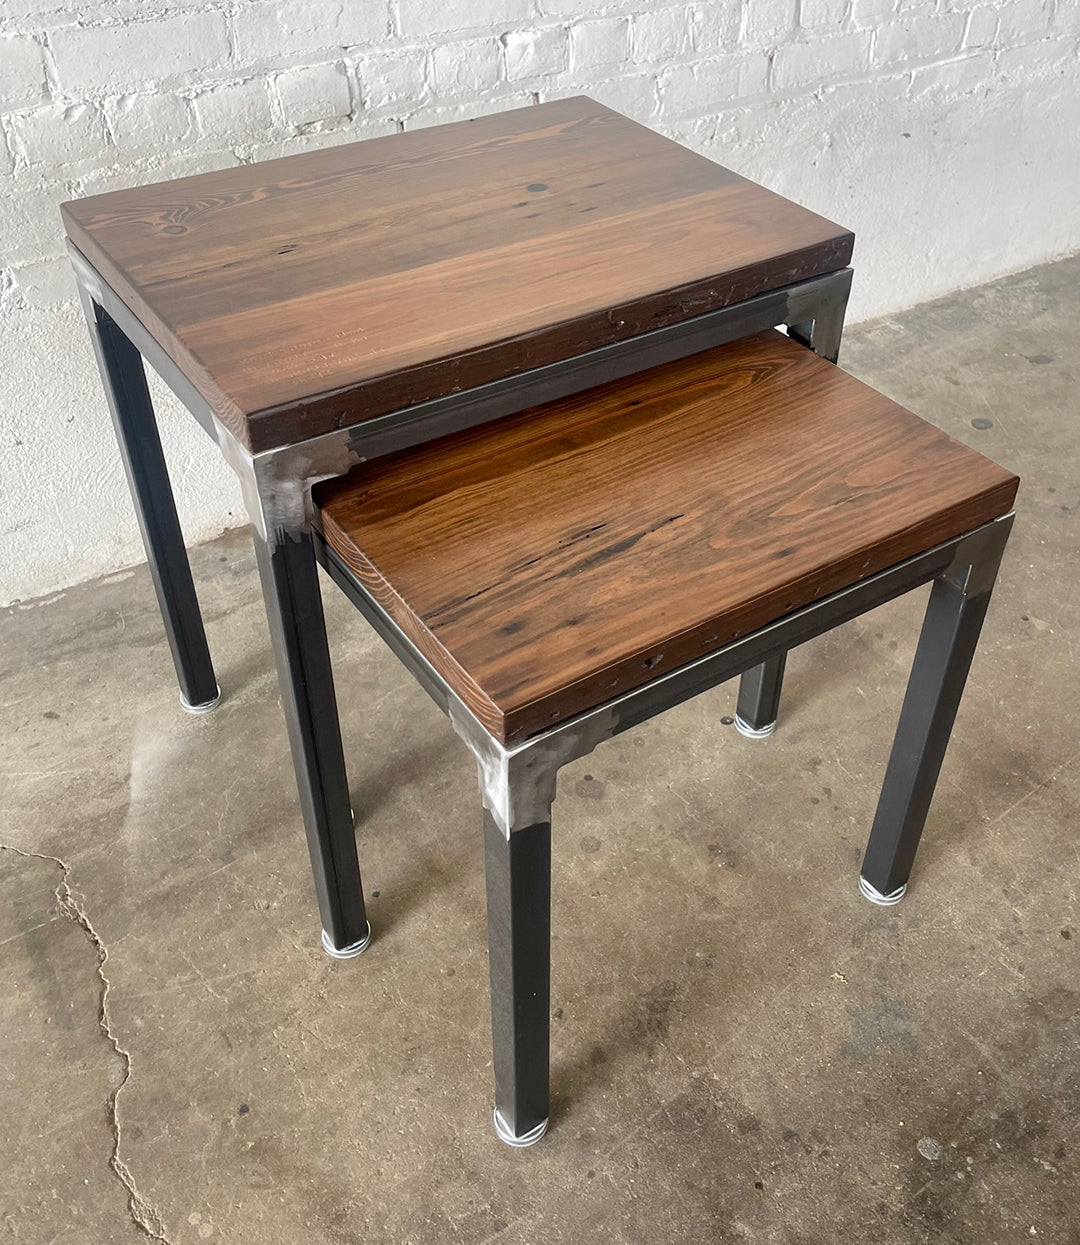 North End Reclaimed Wood Nesting Tables - Walnut Stain Finish